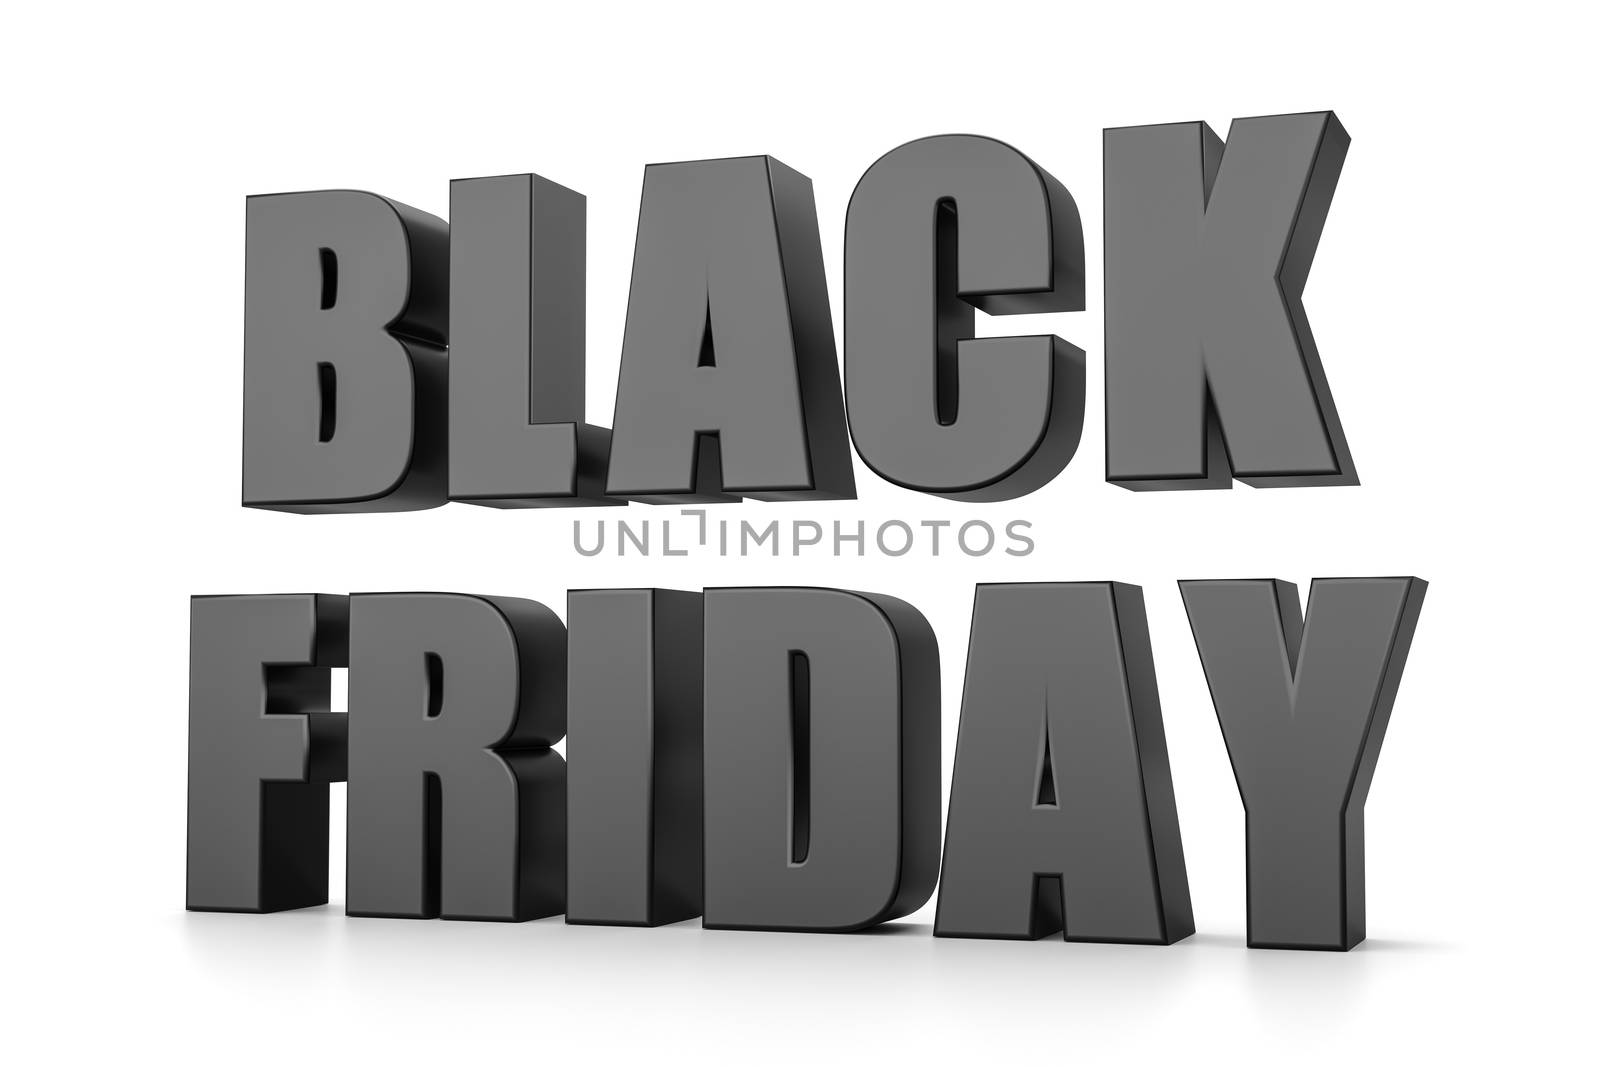 Black Friday 3D Text on White by make